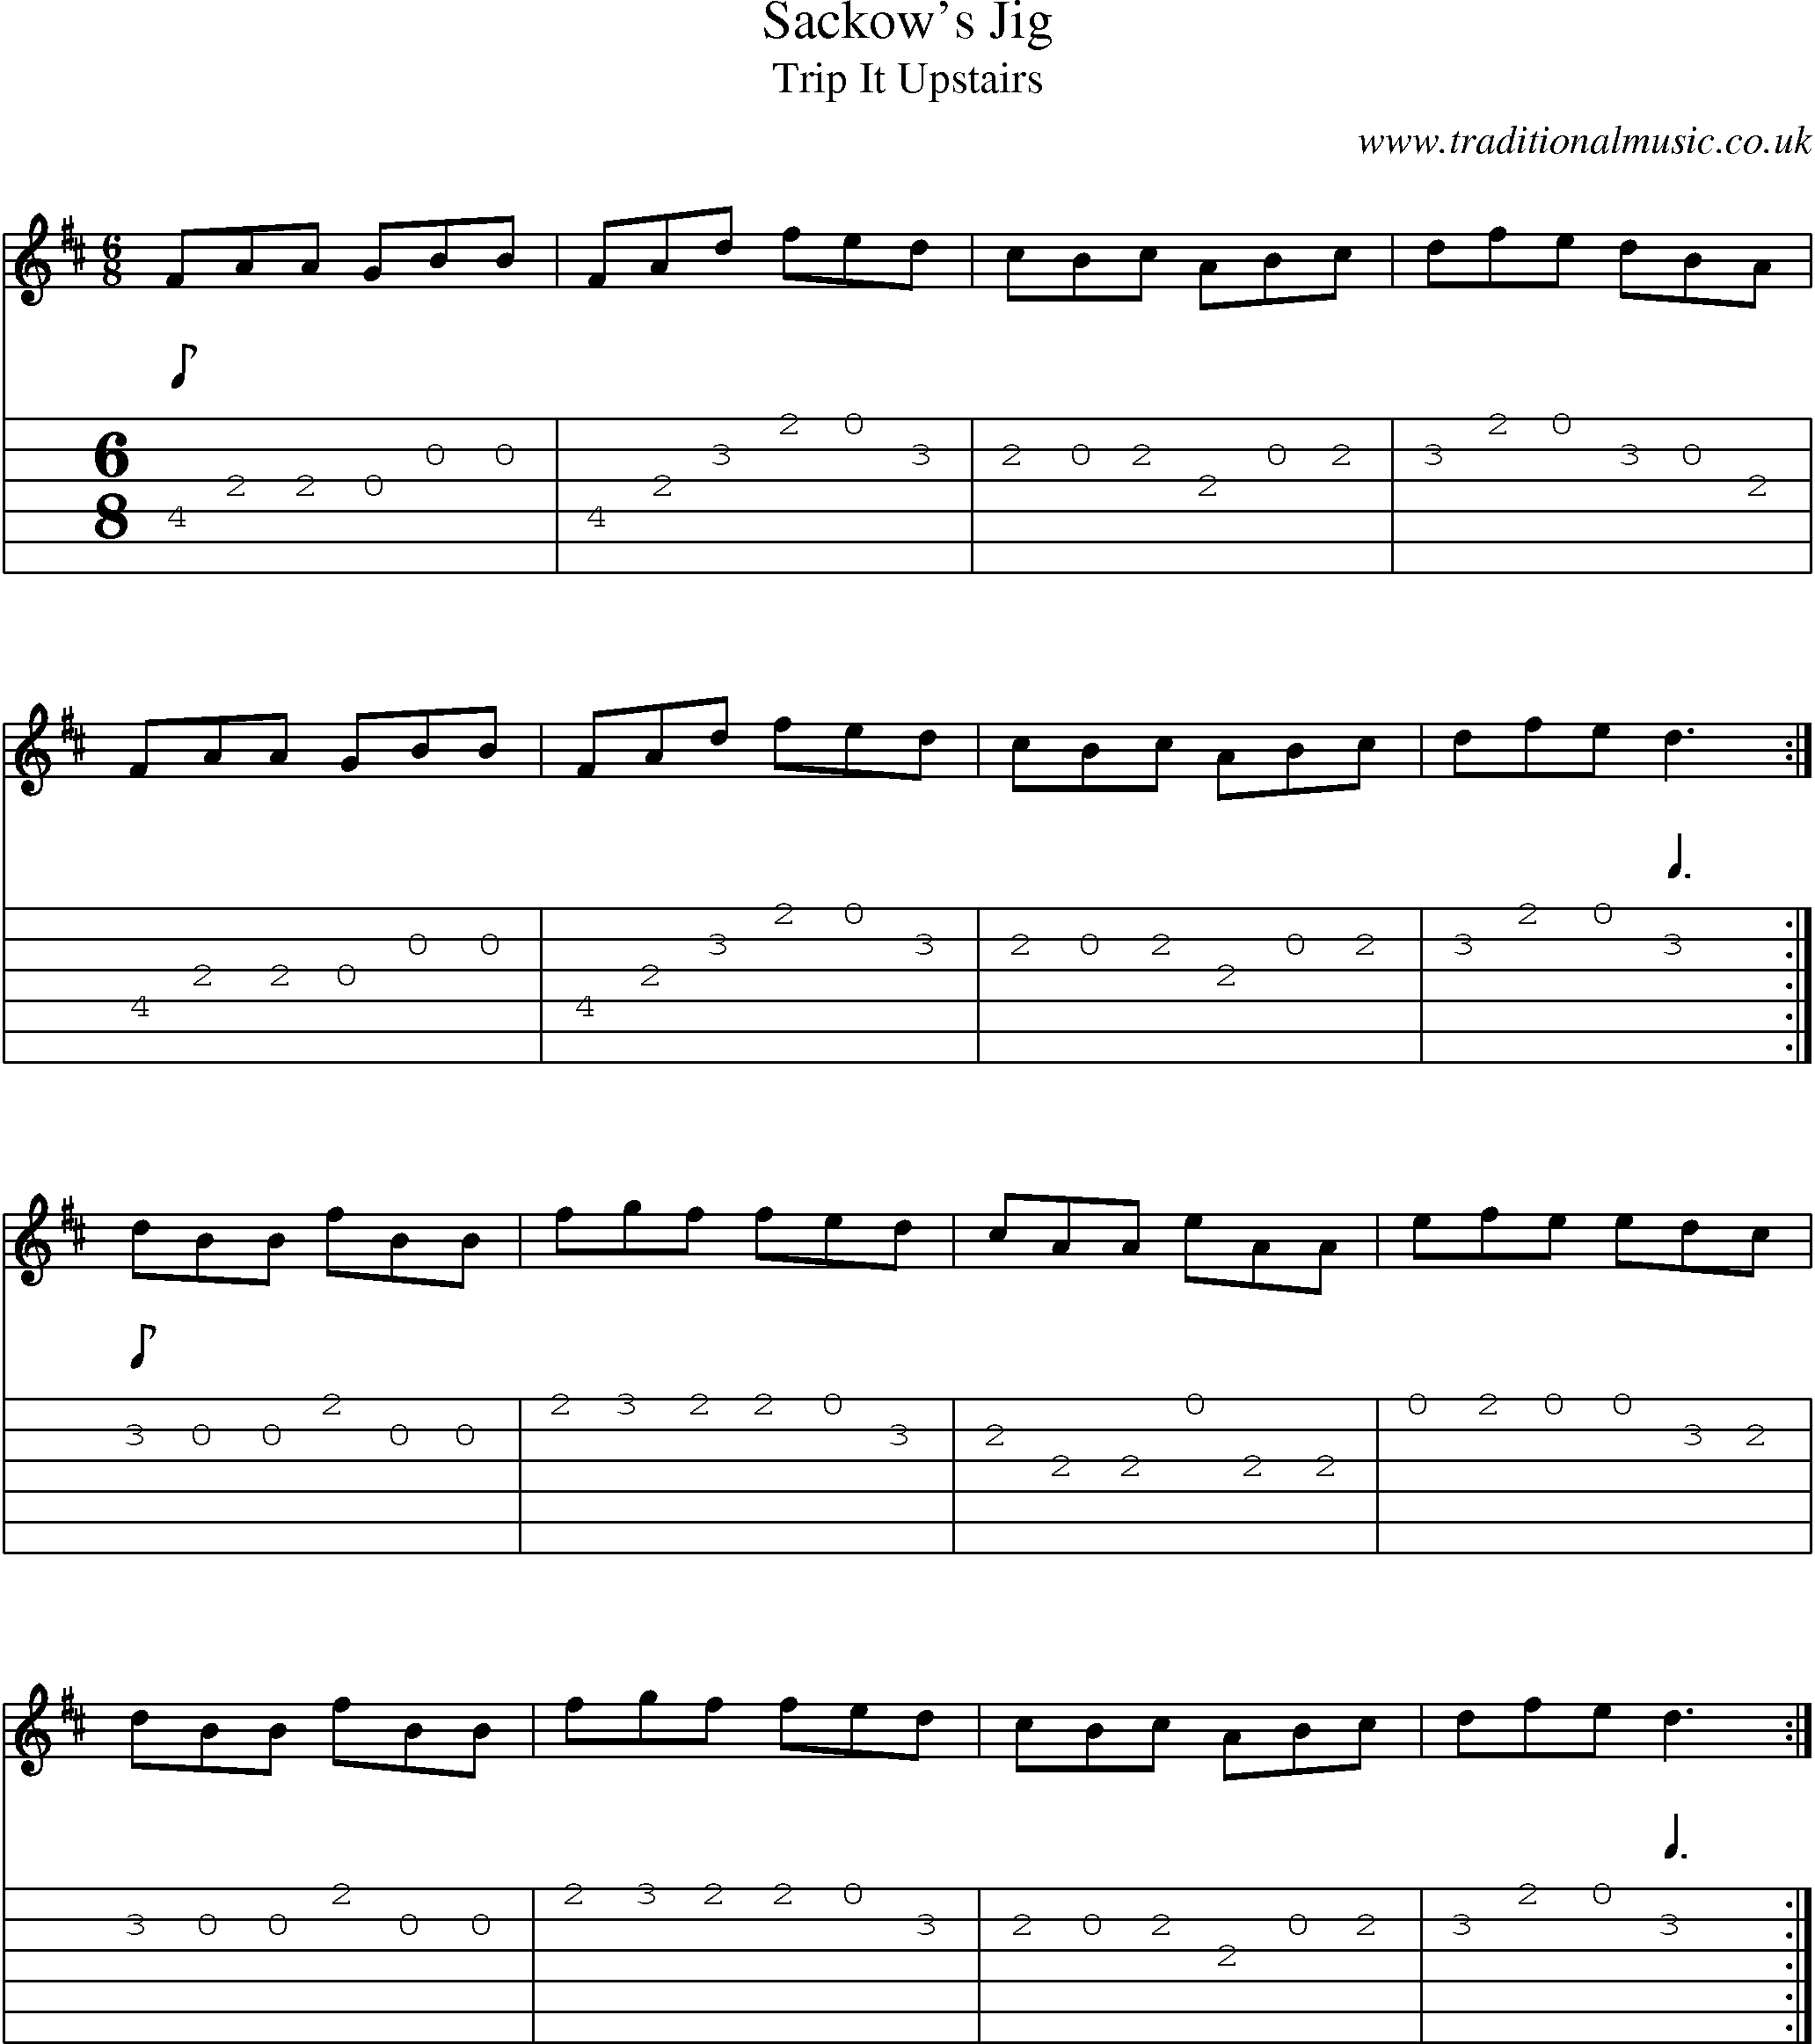 Music Score and Guitar Tabs for Sackows Jig